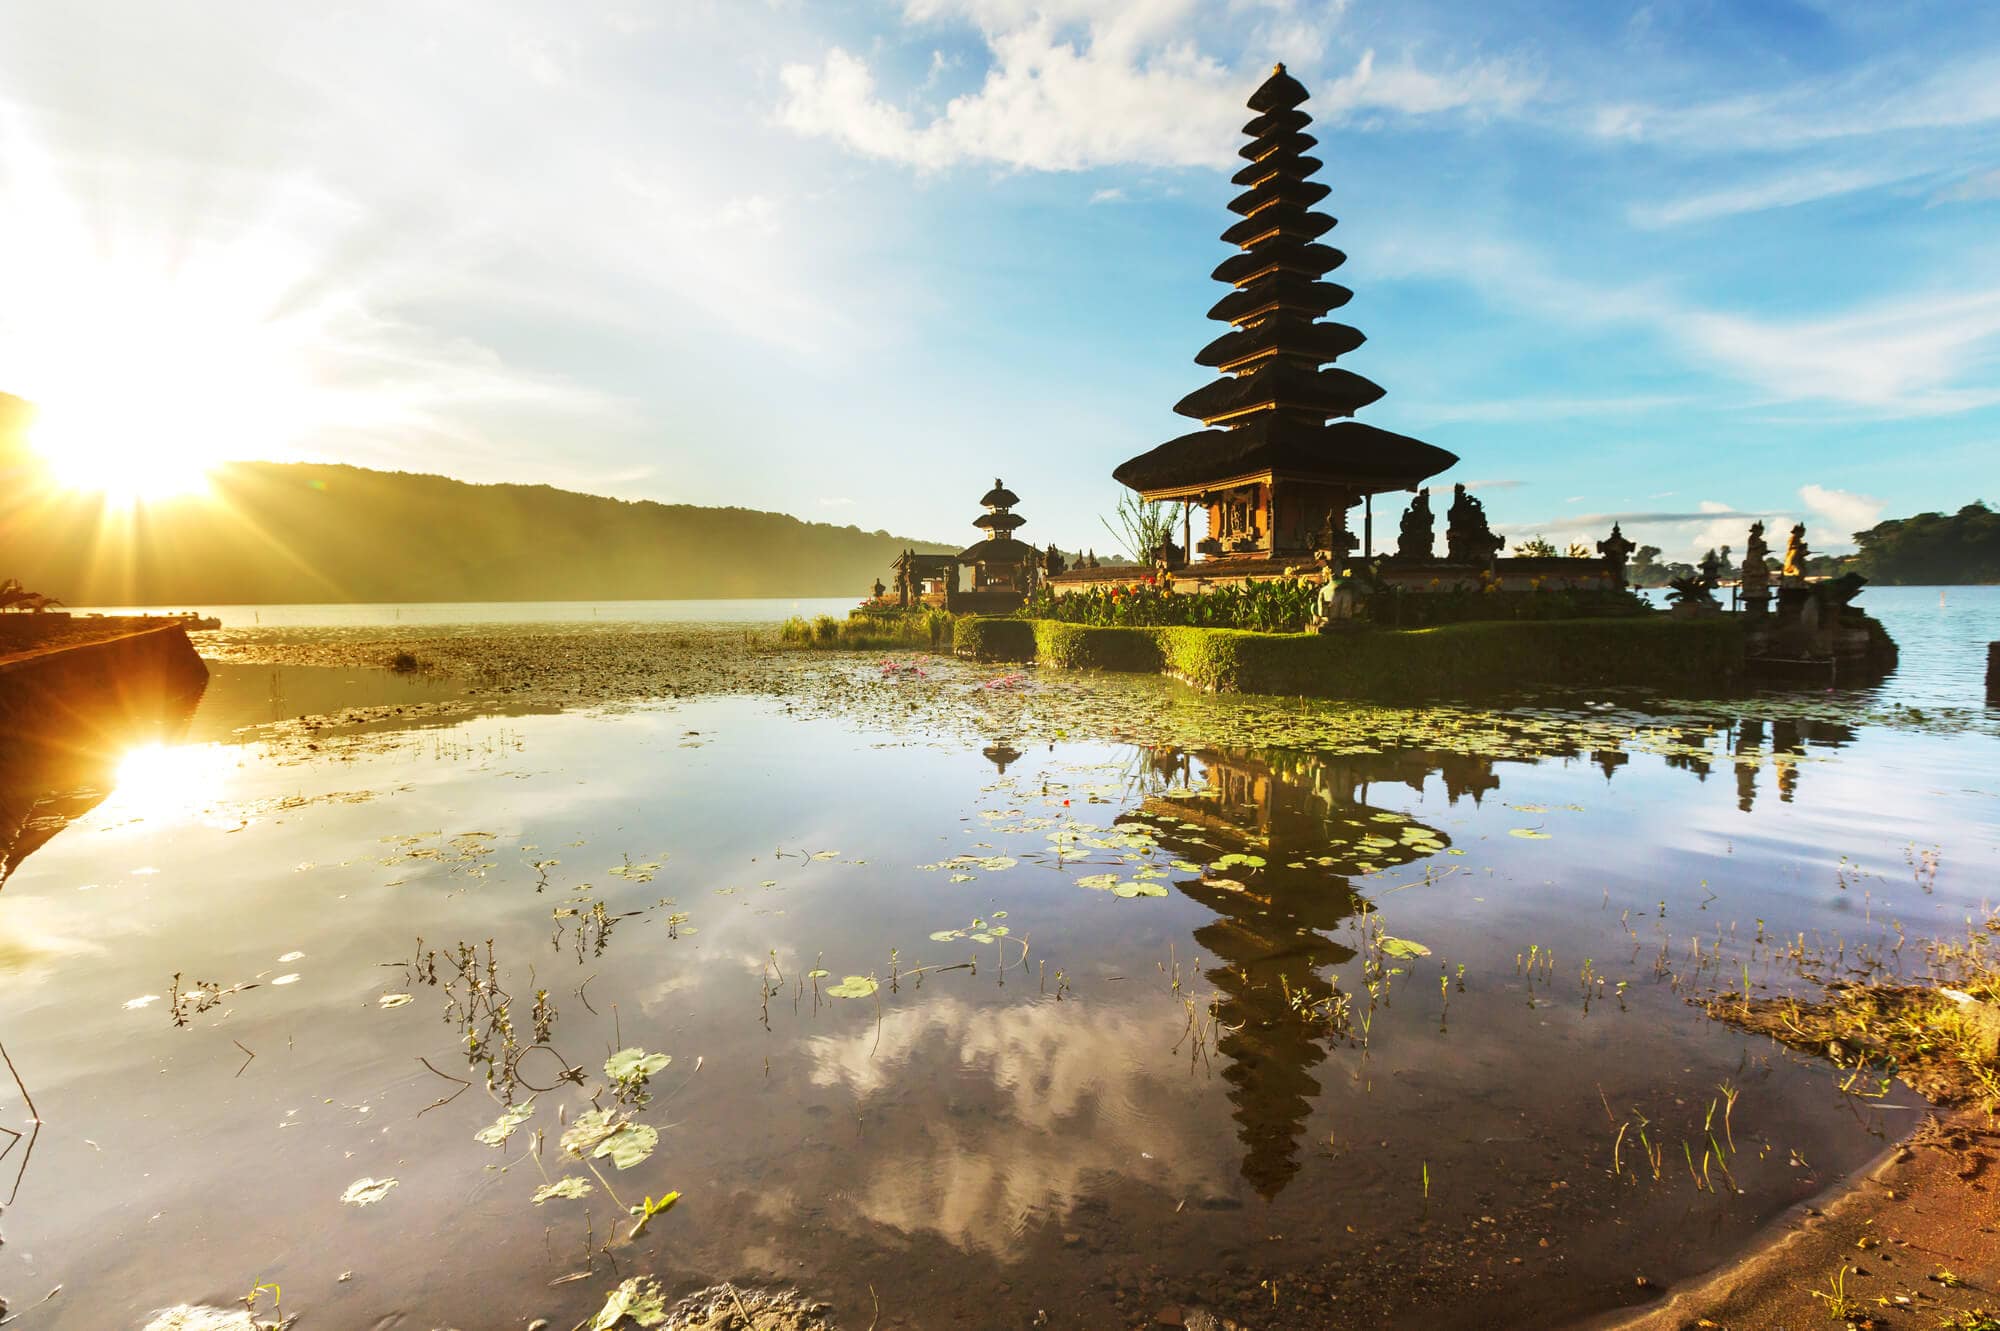 Where to stay in Bali: A complete guide to the different areas on the island - Ulun Danu Beratan Temple in North Bali